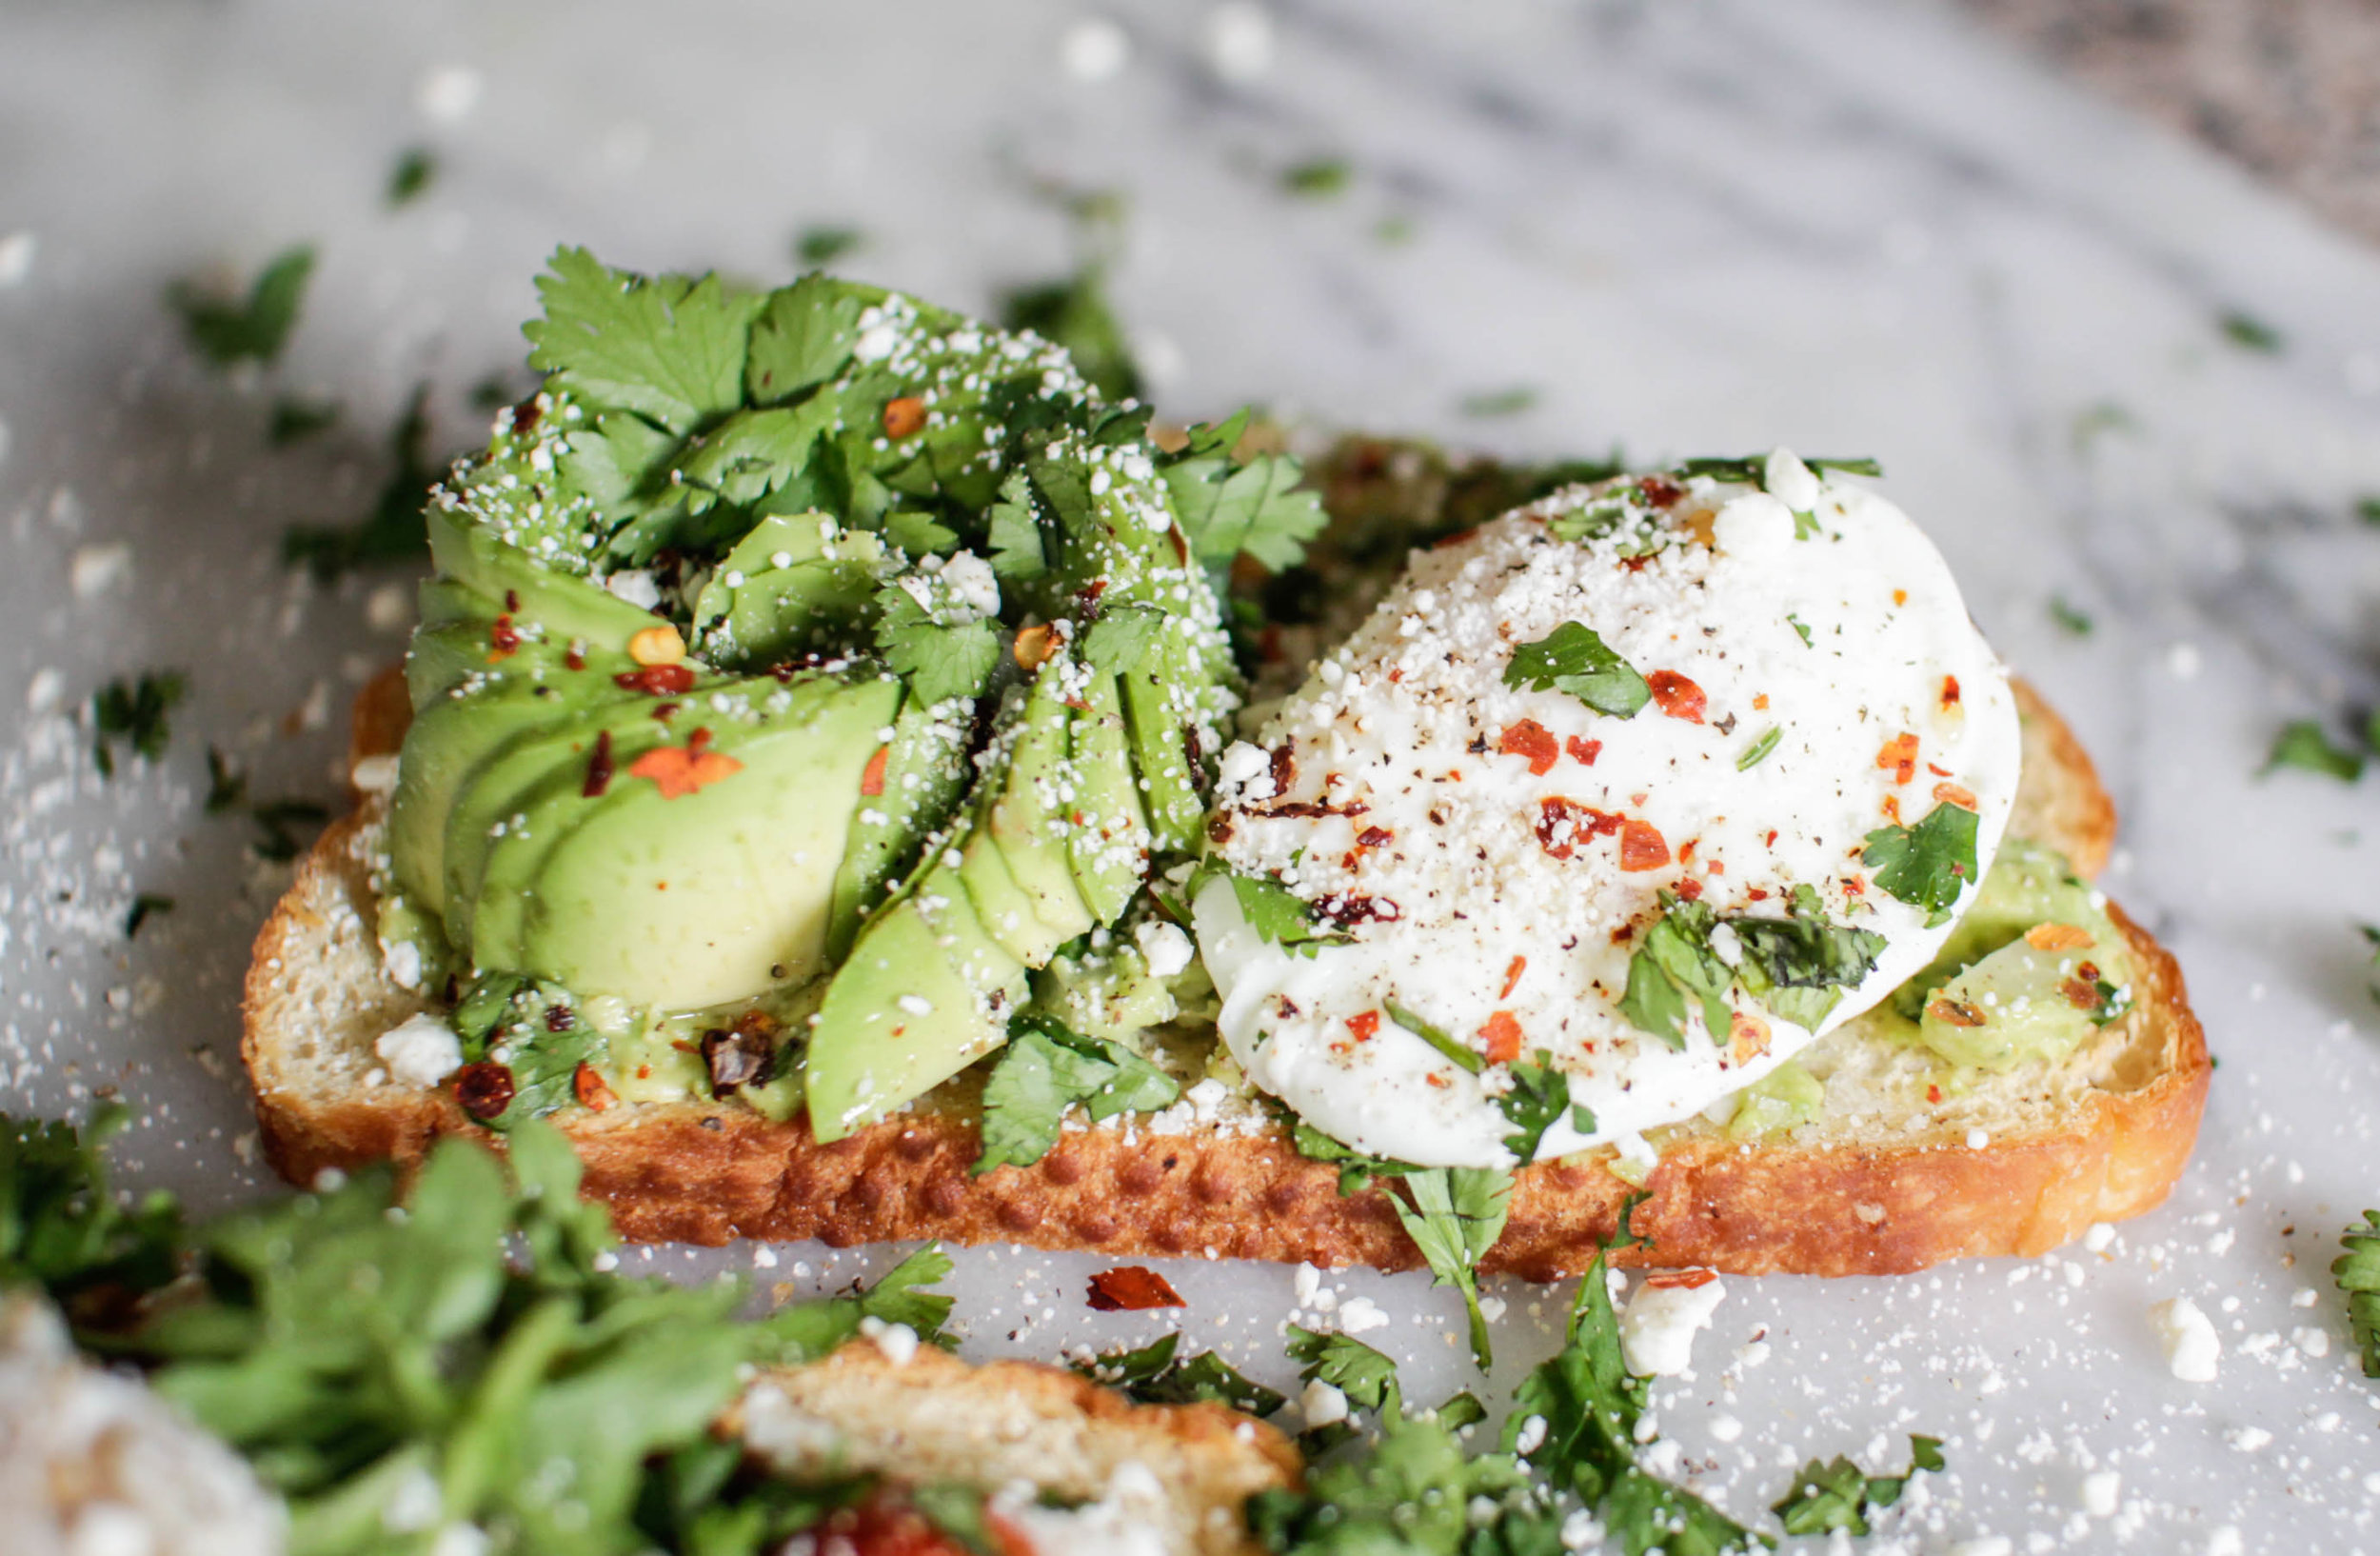 Easy To Make Breakfast Ideas with Egg and Avocado